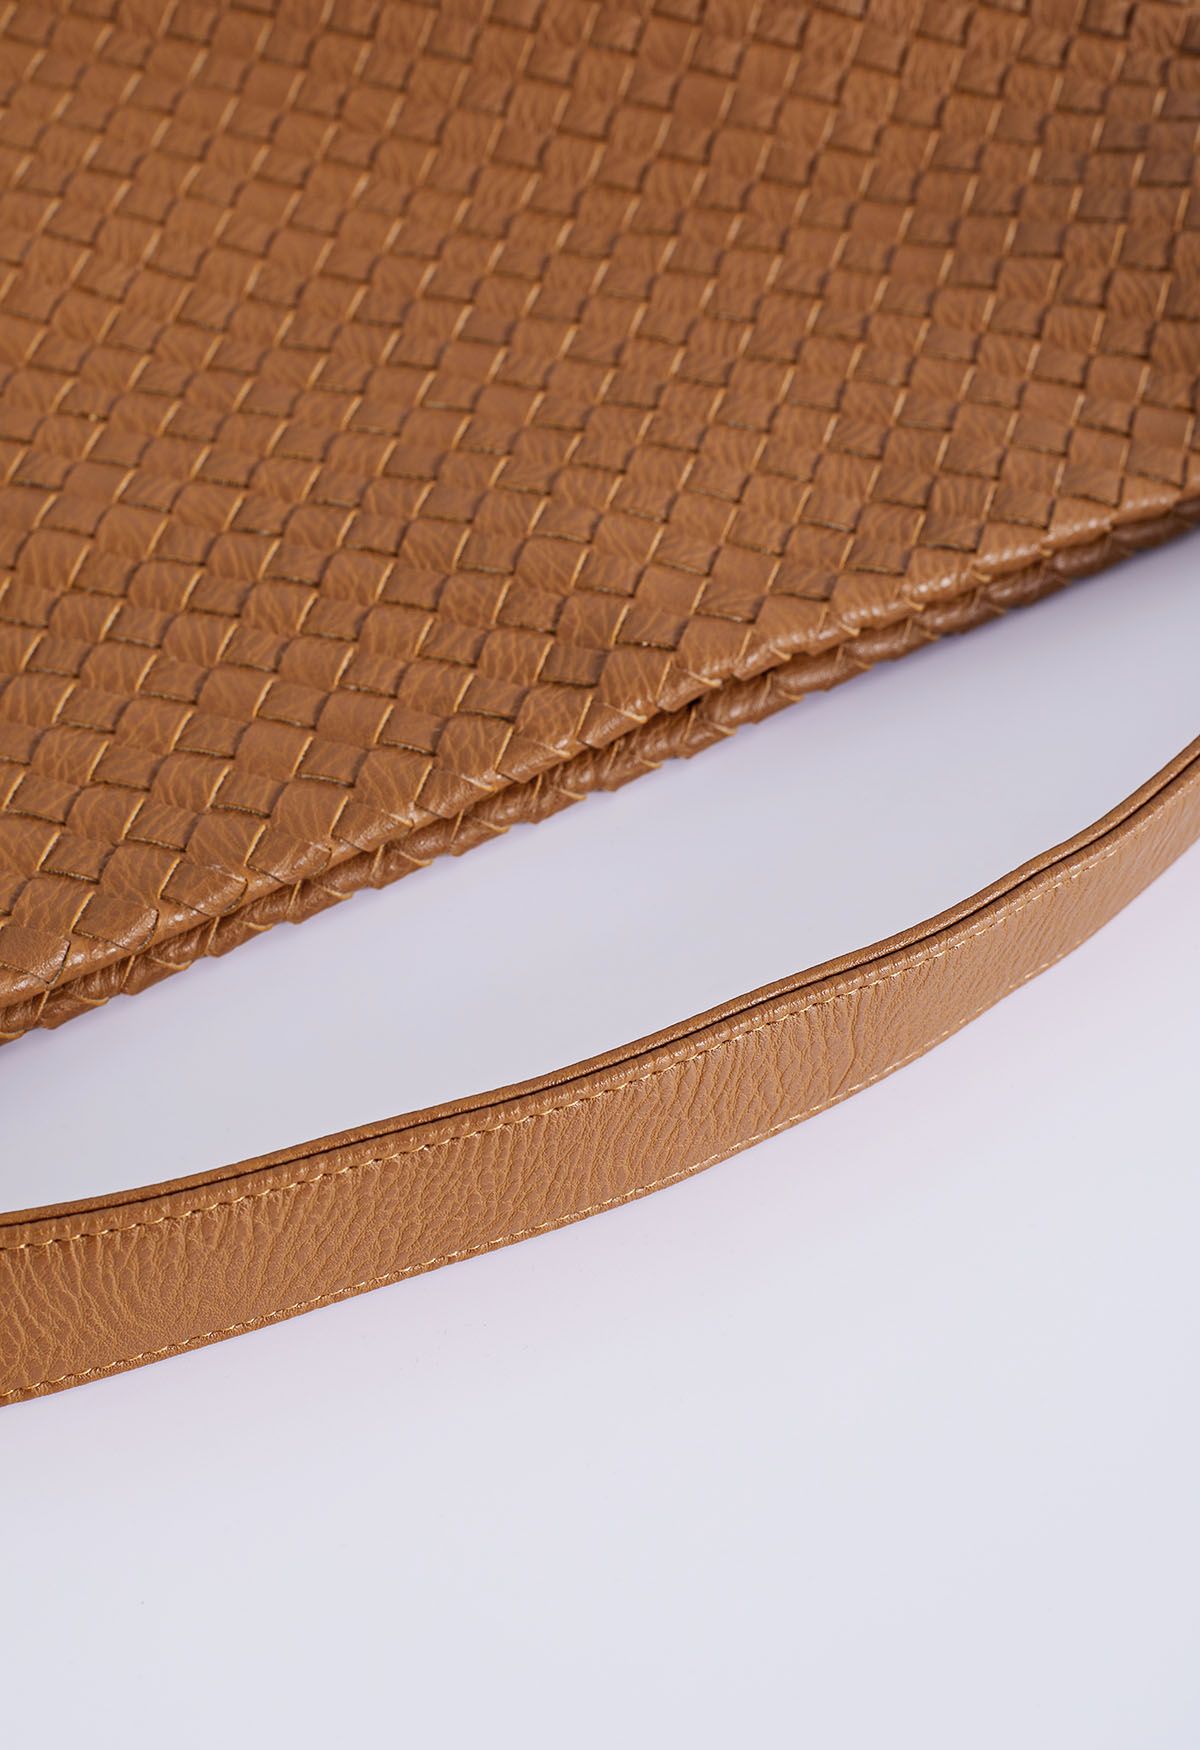 Solid Color Woven Bag in Caramel